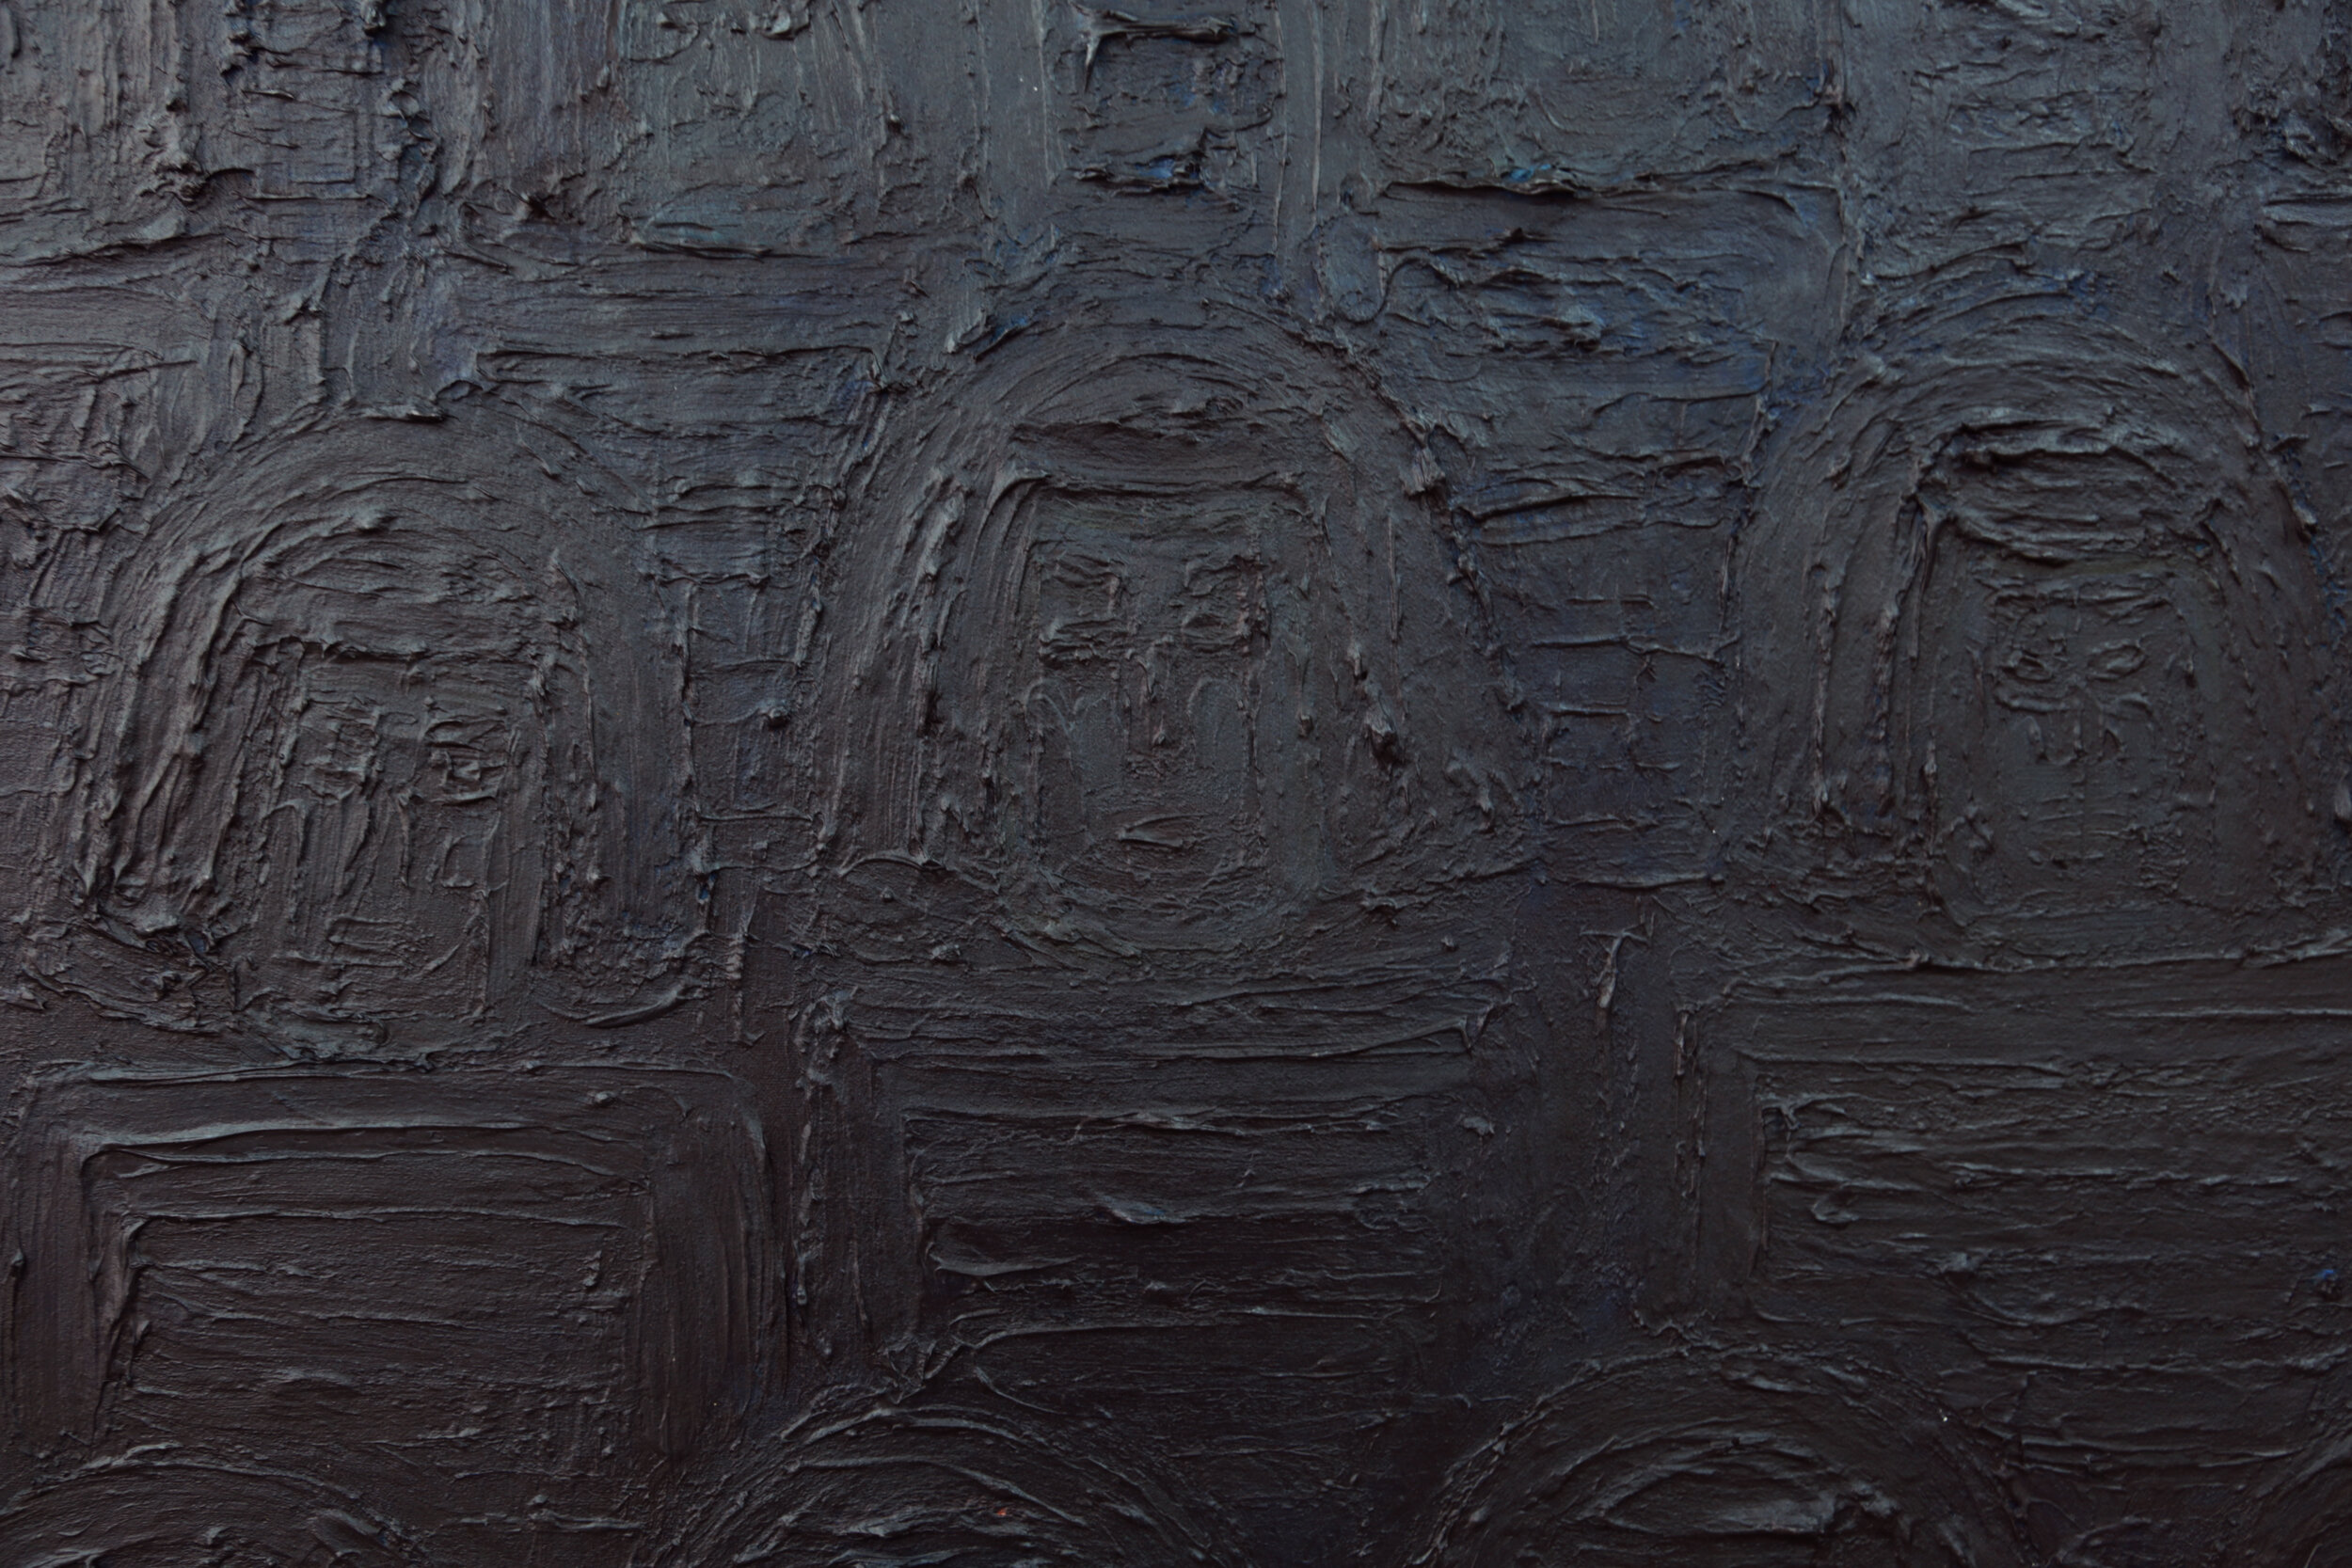  Detail view of:   Alex Nguyen-Vo   Riot Officers Waiting in The Dark, August-Sept 2019  August - September 2019 Acrylic on canvas 36 x 48 inches 